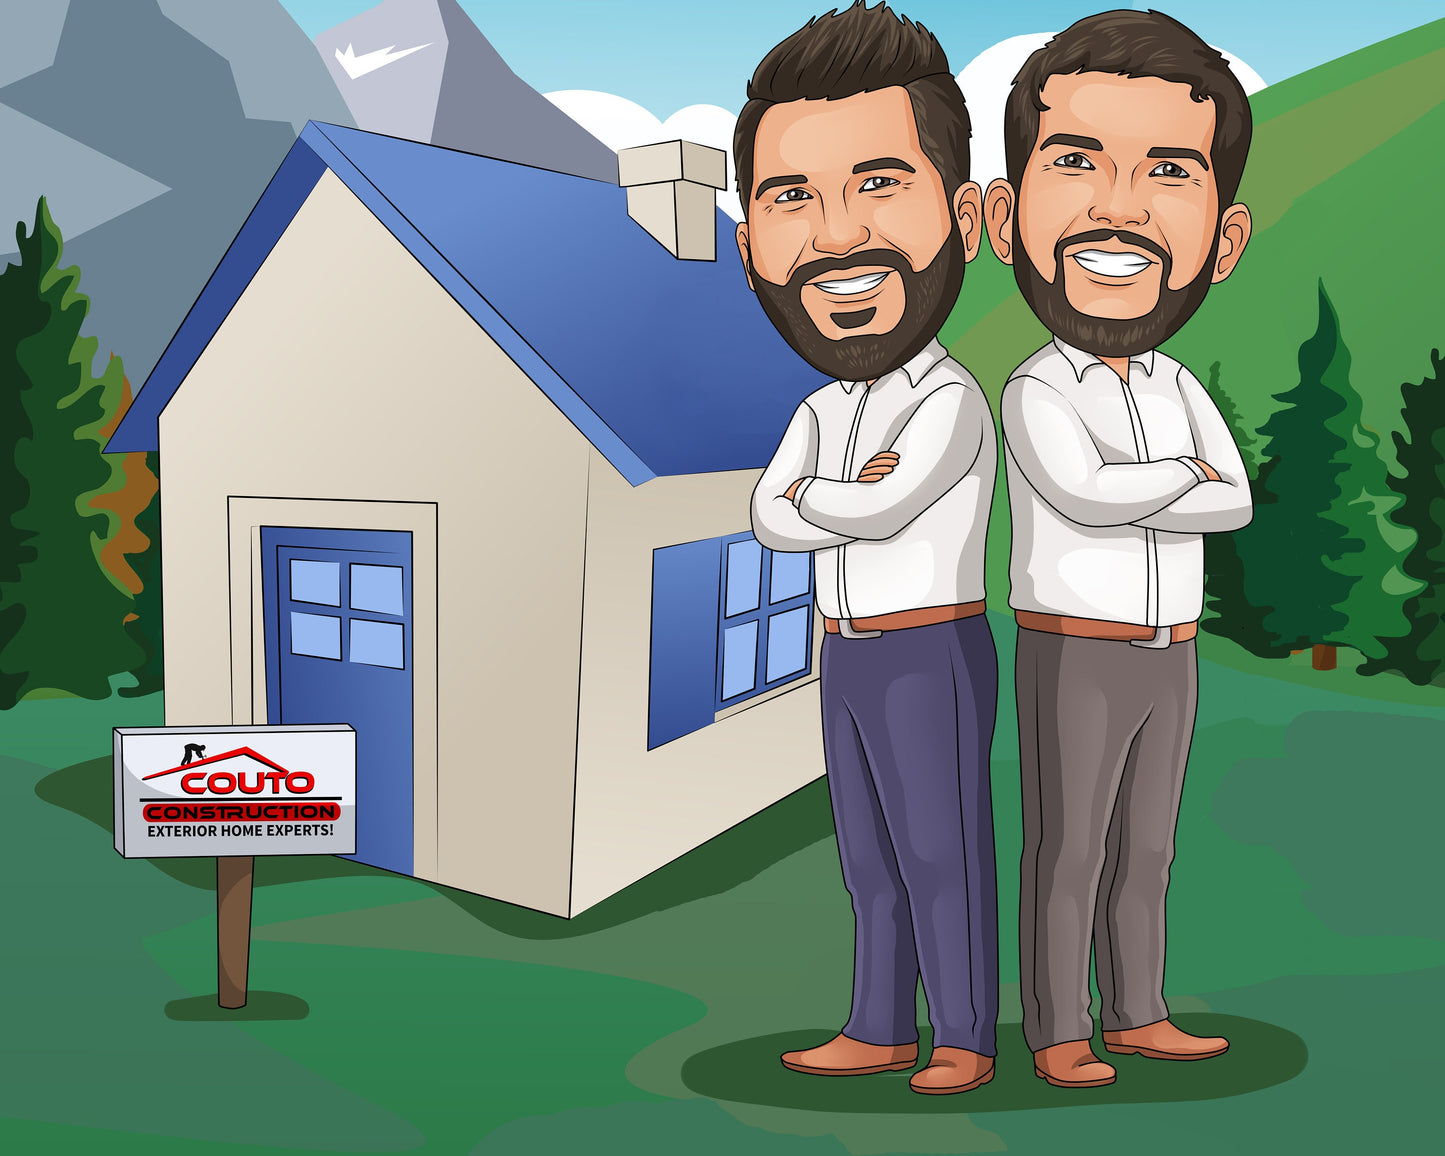 Real Estate Agent Gift - Custom Caricature Portrait From Your Photo/Real Estate broker gift